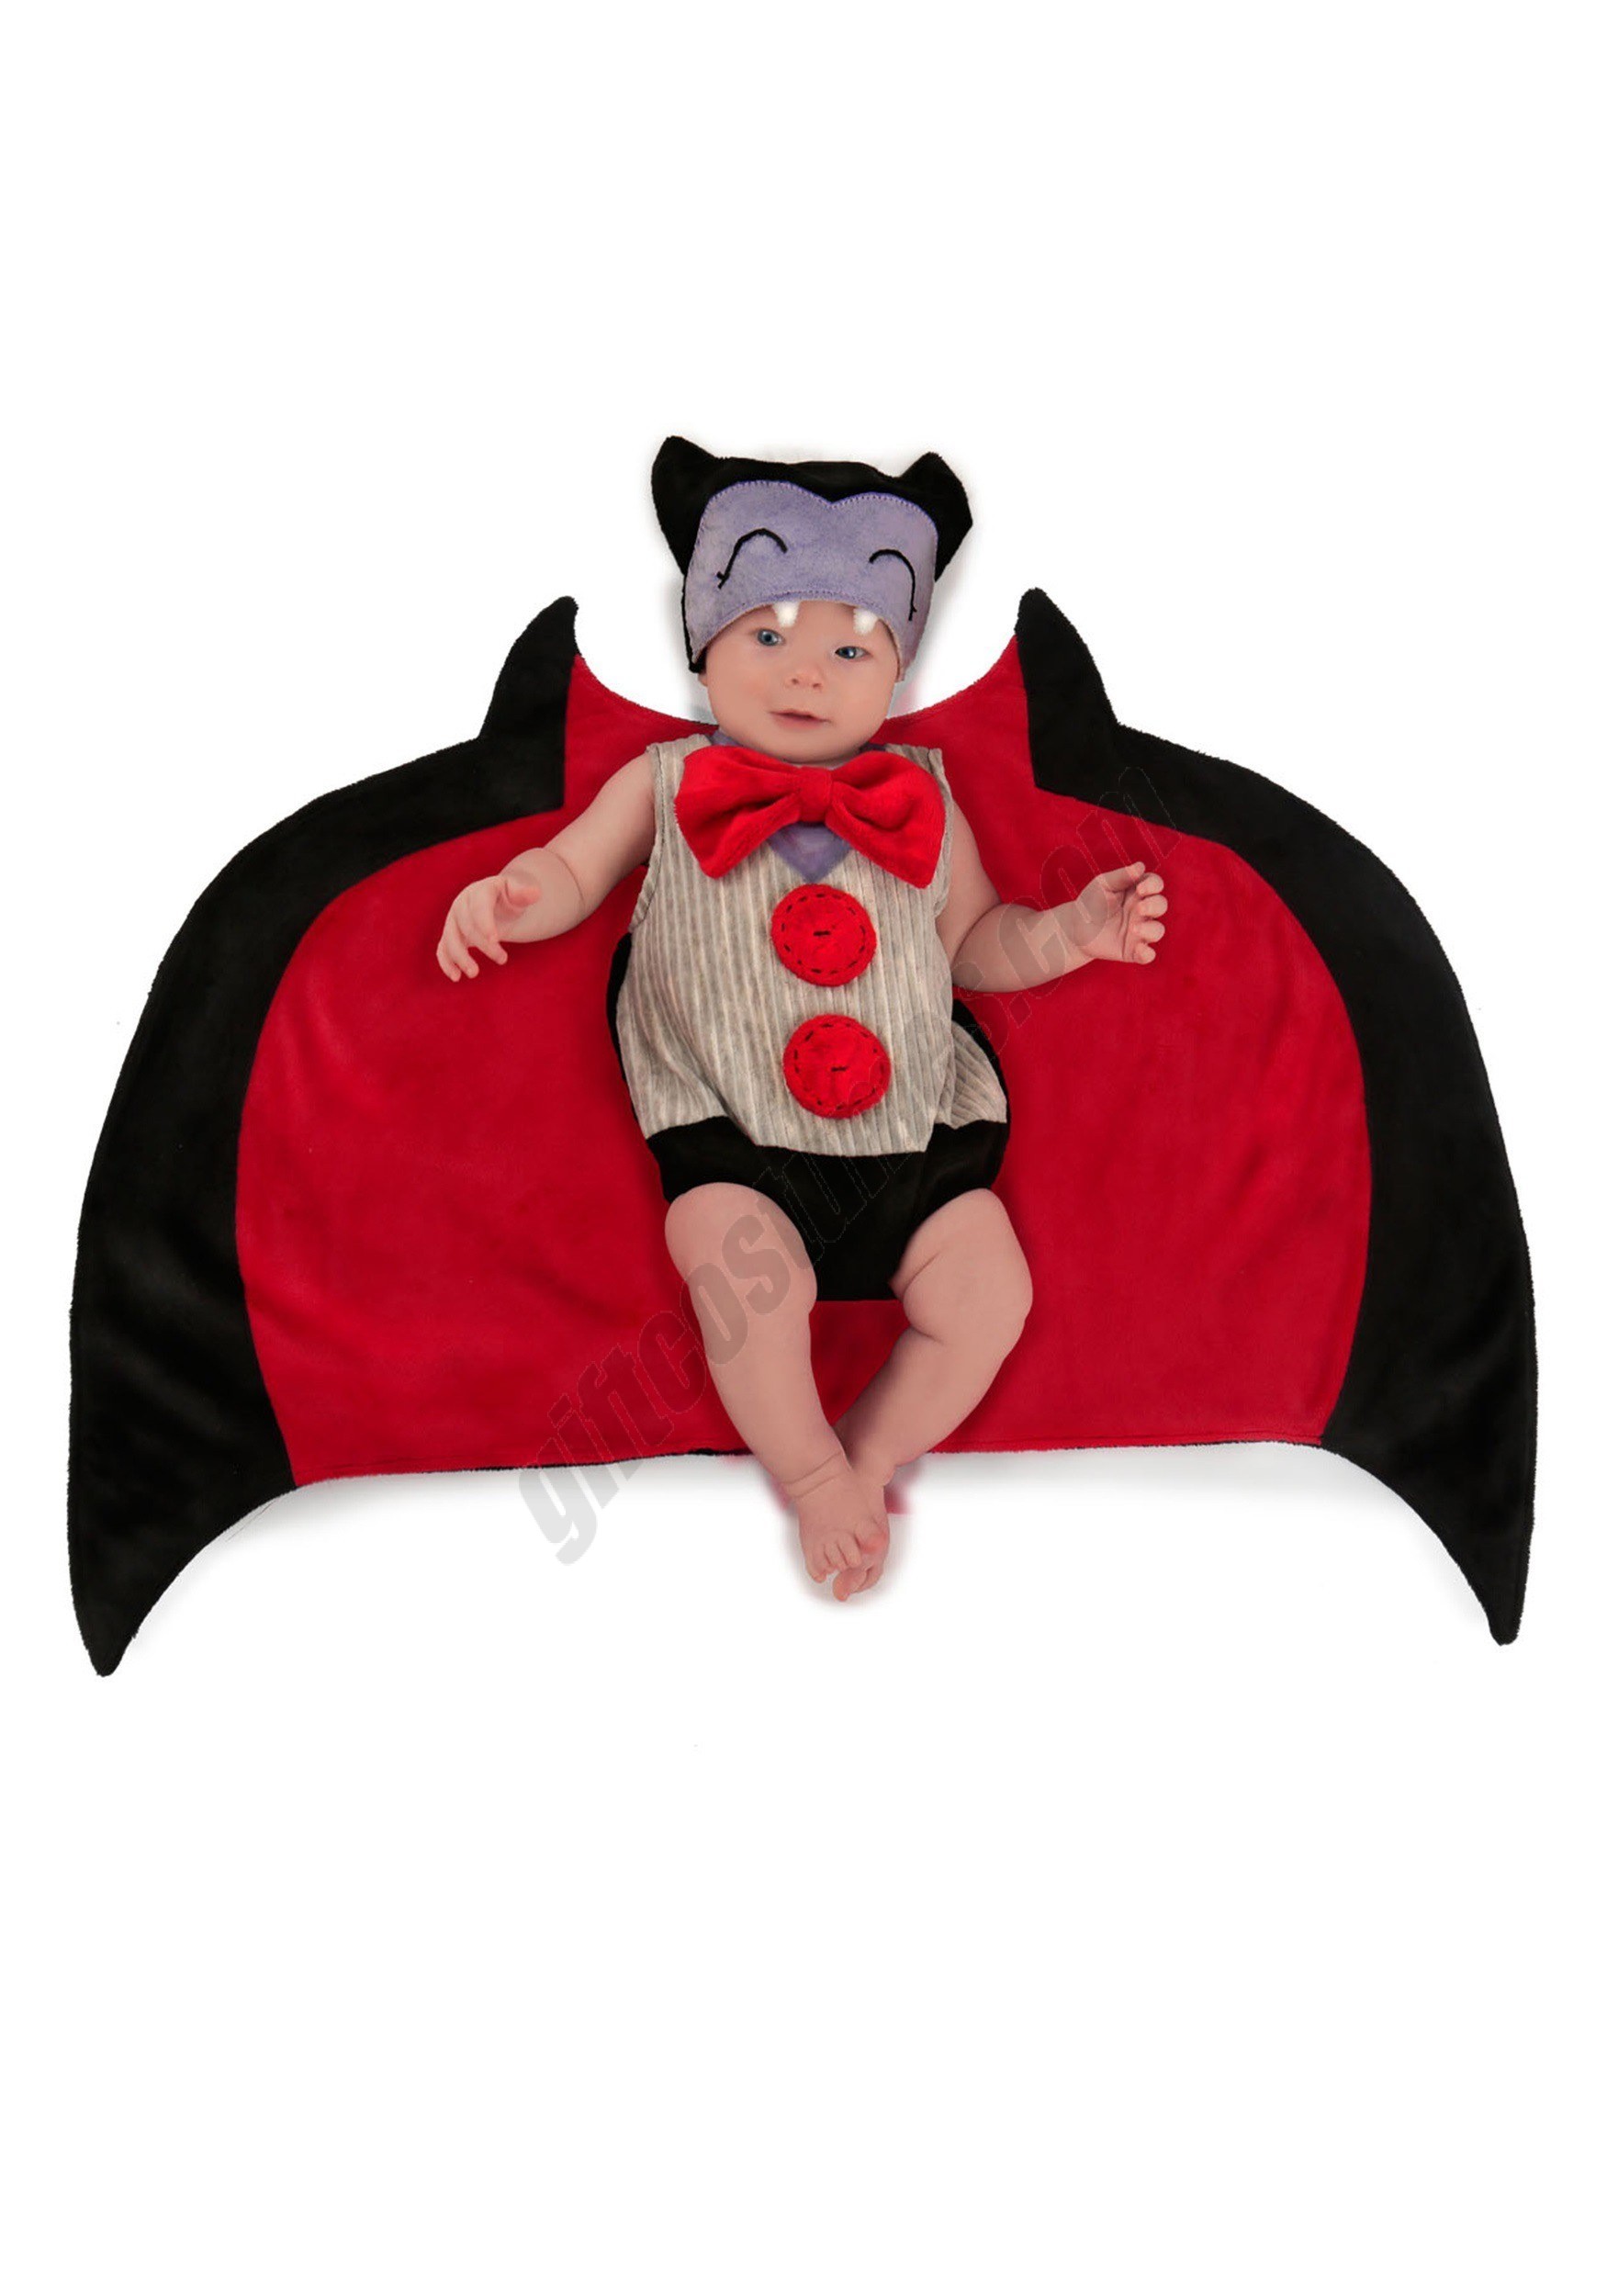 Infant Drooly Dracula Swaddle Costume Promotions - Infant Drooly Dracula Swaddle Costume Promotions